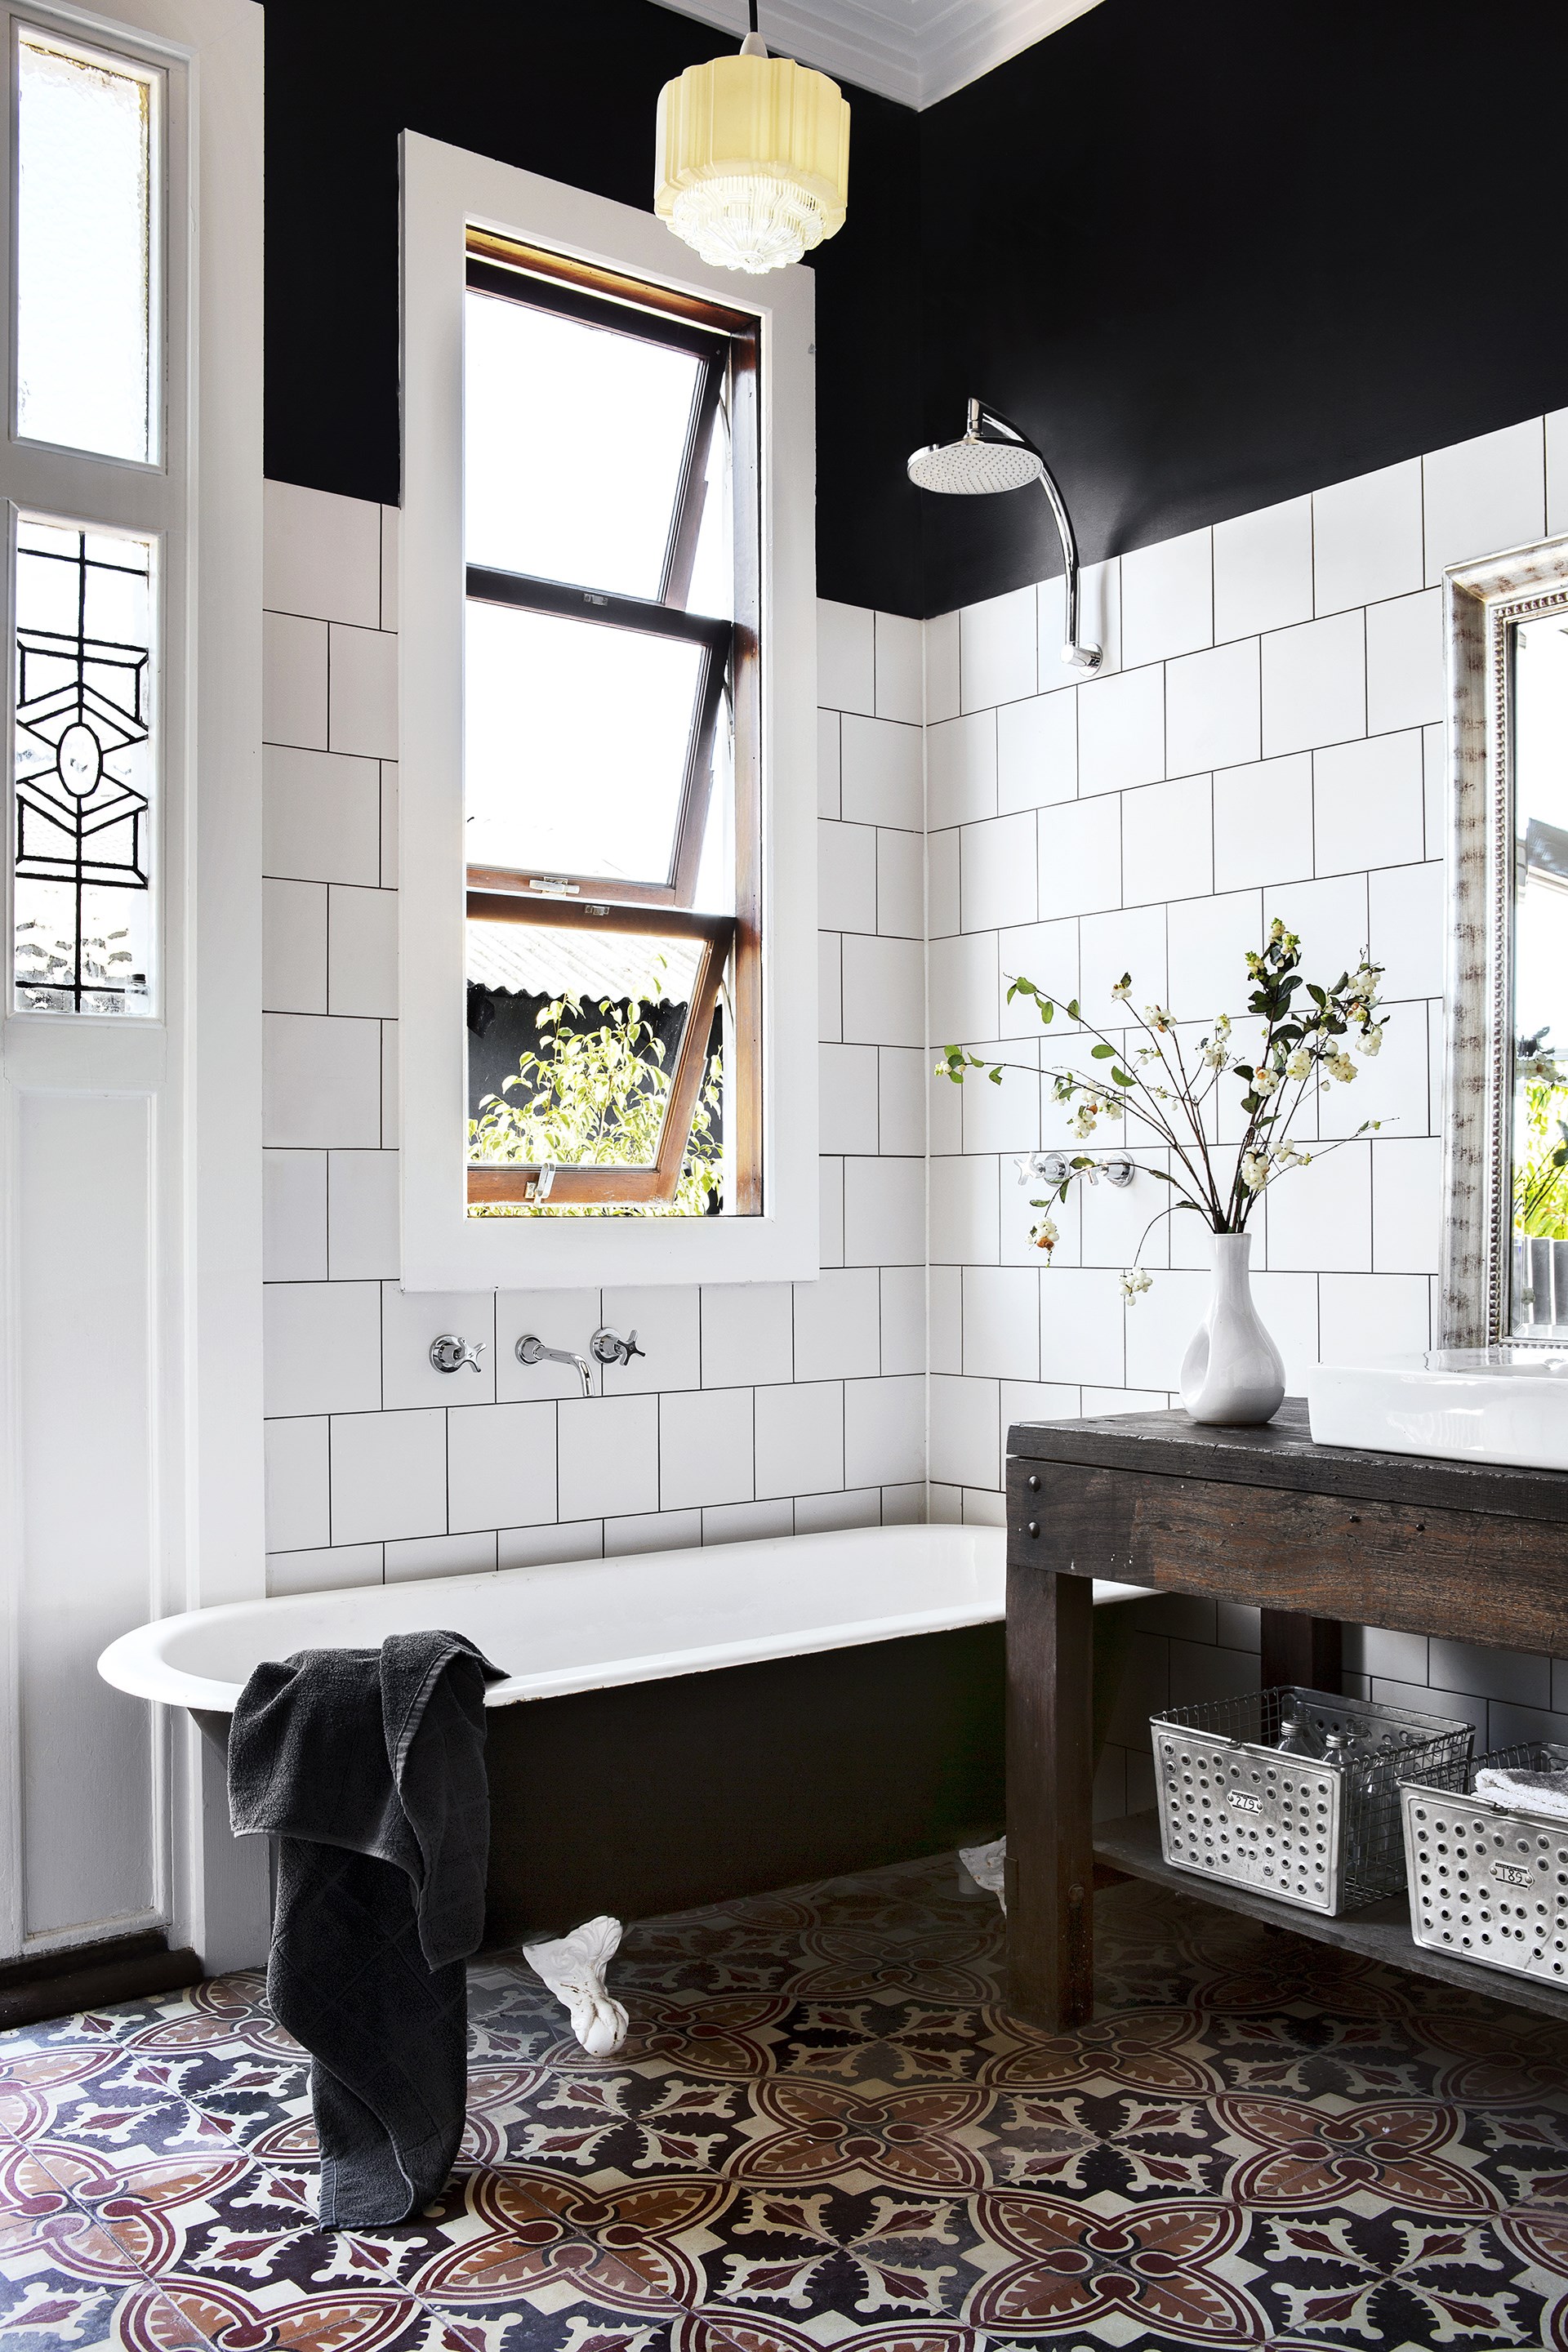 The black and white palette, vintage pendant and leadlight window are all references to Art Deco style in this [Perth home](http://www.homestolove.com.au/carla-and-bens-personality-filled-new-house-1799/|target="_blank"), which is actually a new build. *Photo: Angelita Bonetti*